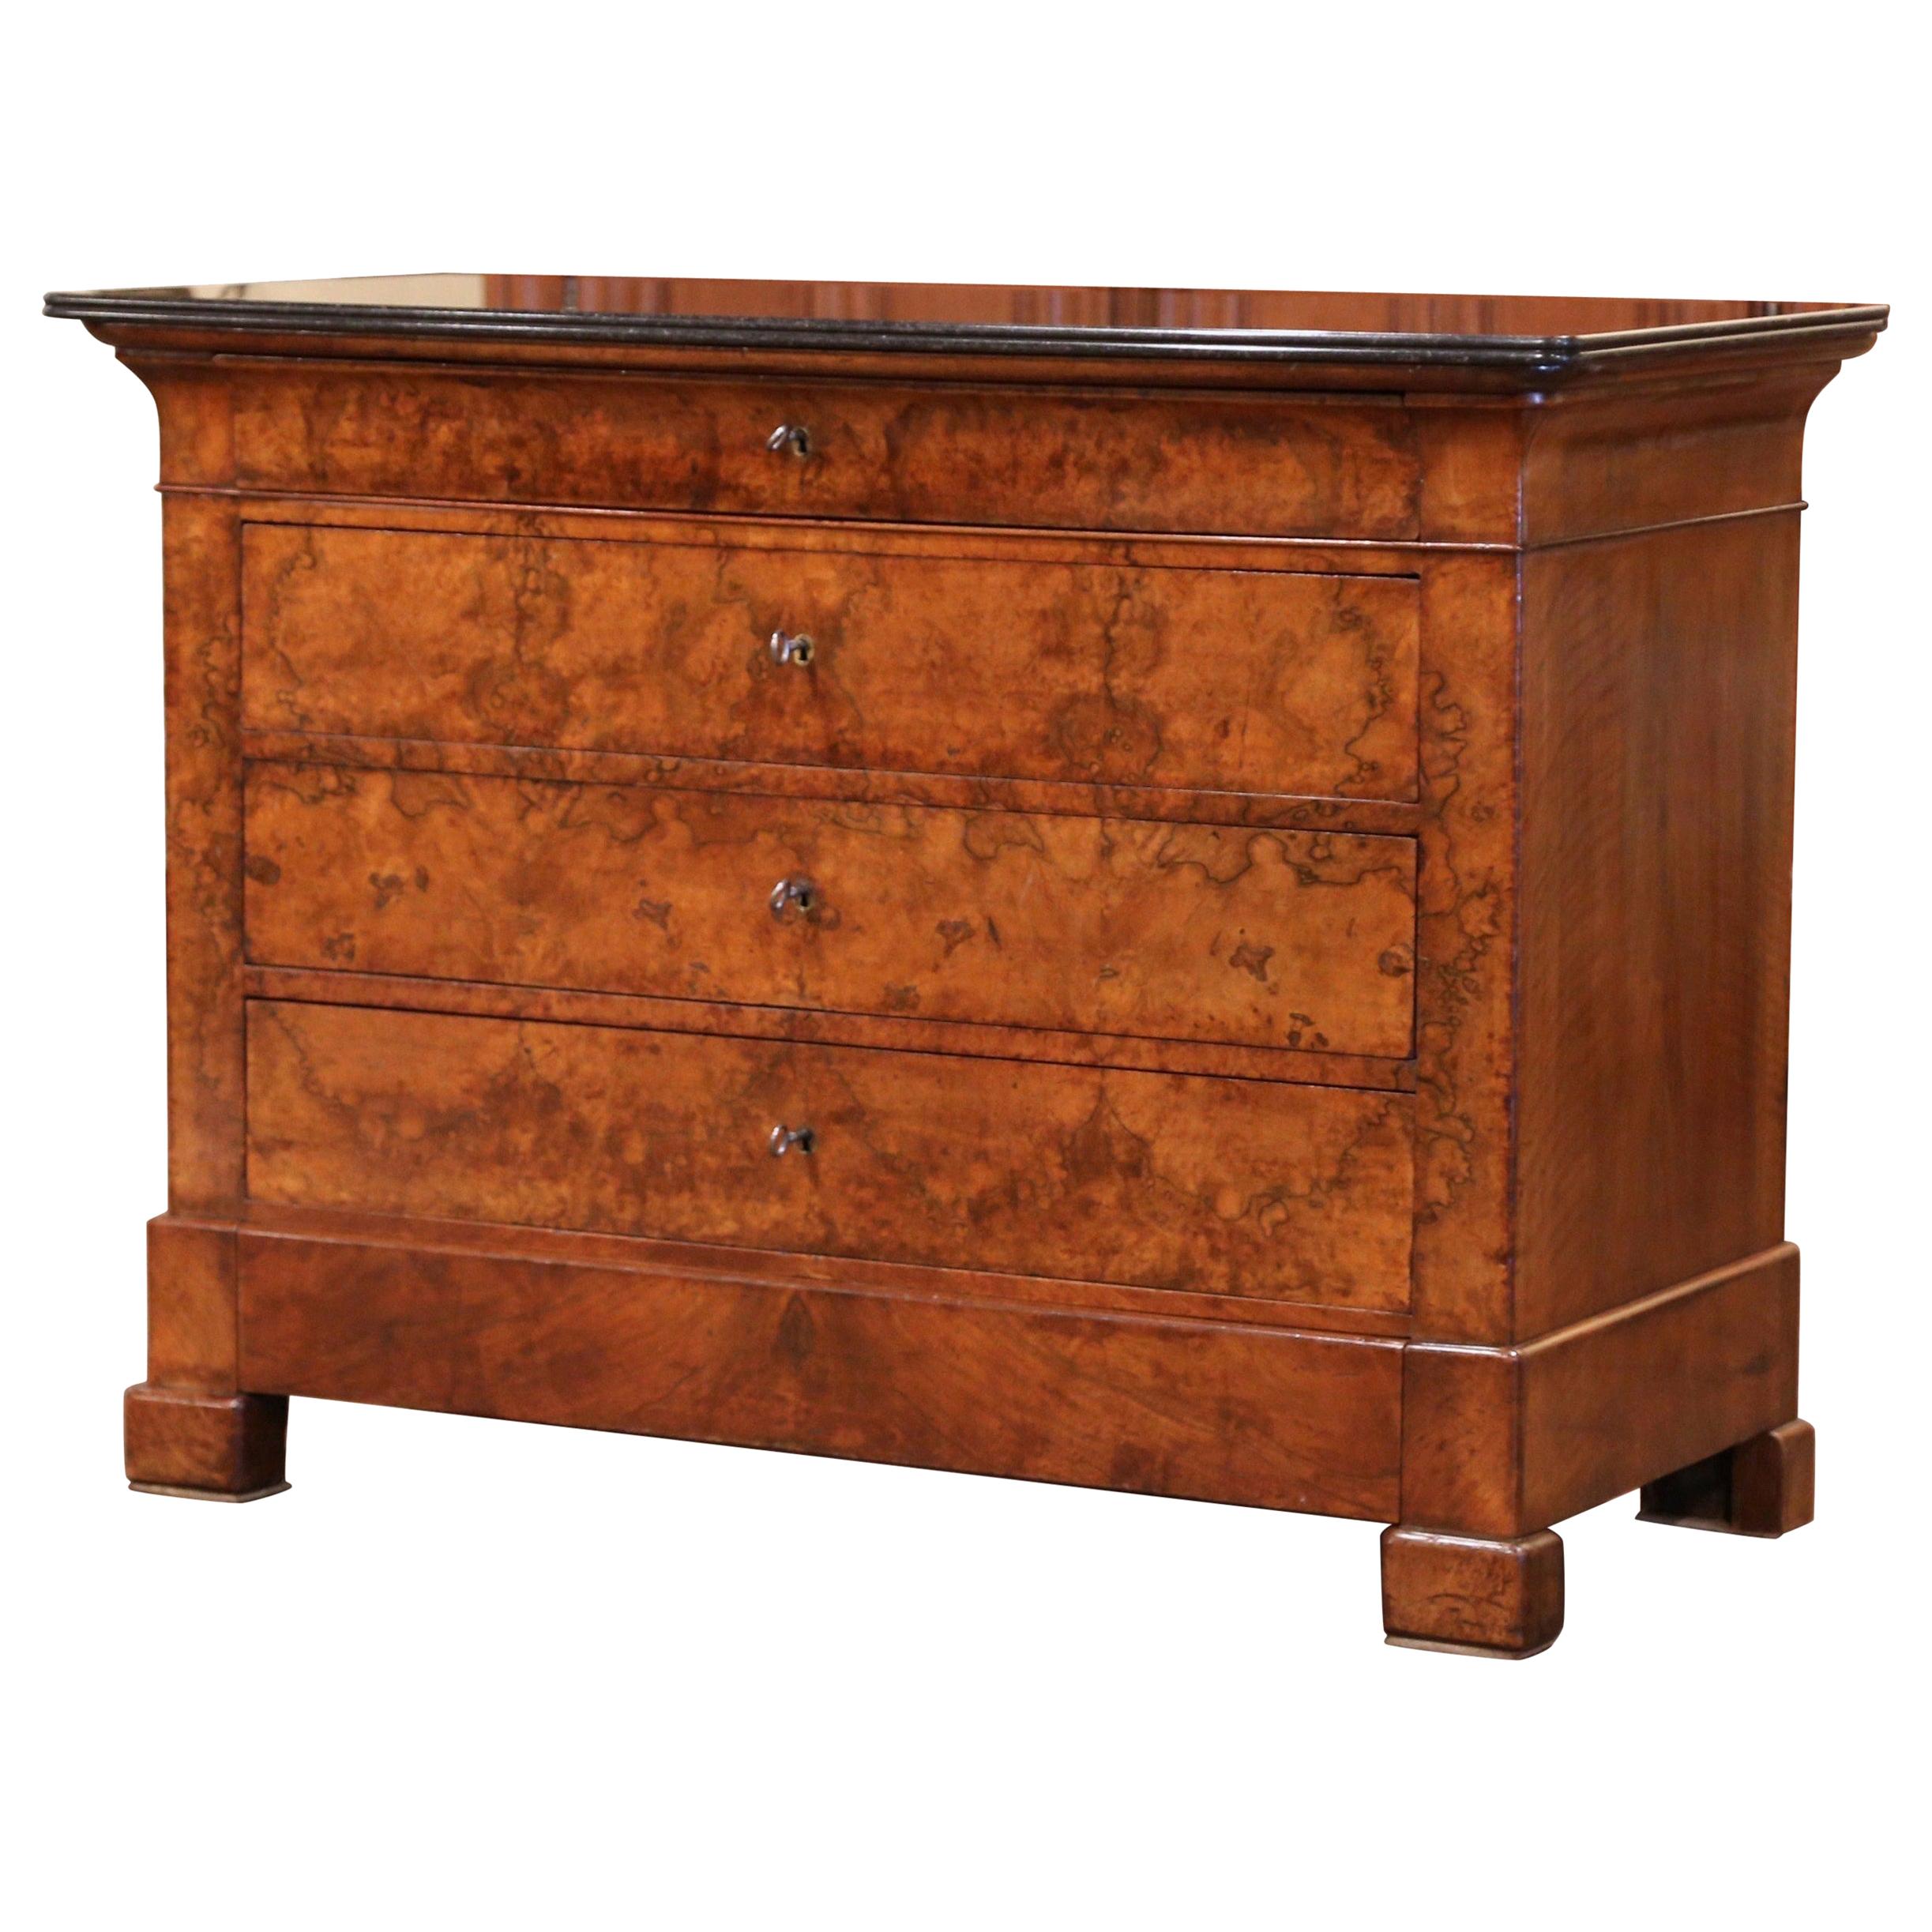 Mid-19th Century French Louis Philippe Burl Walnut Commode with Black Marble Top